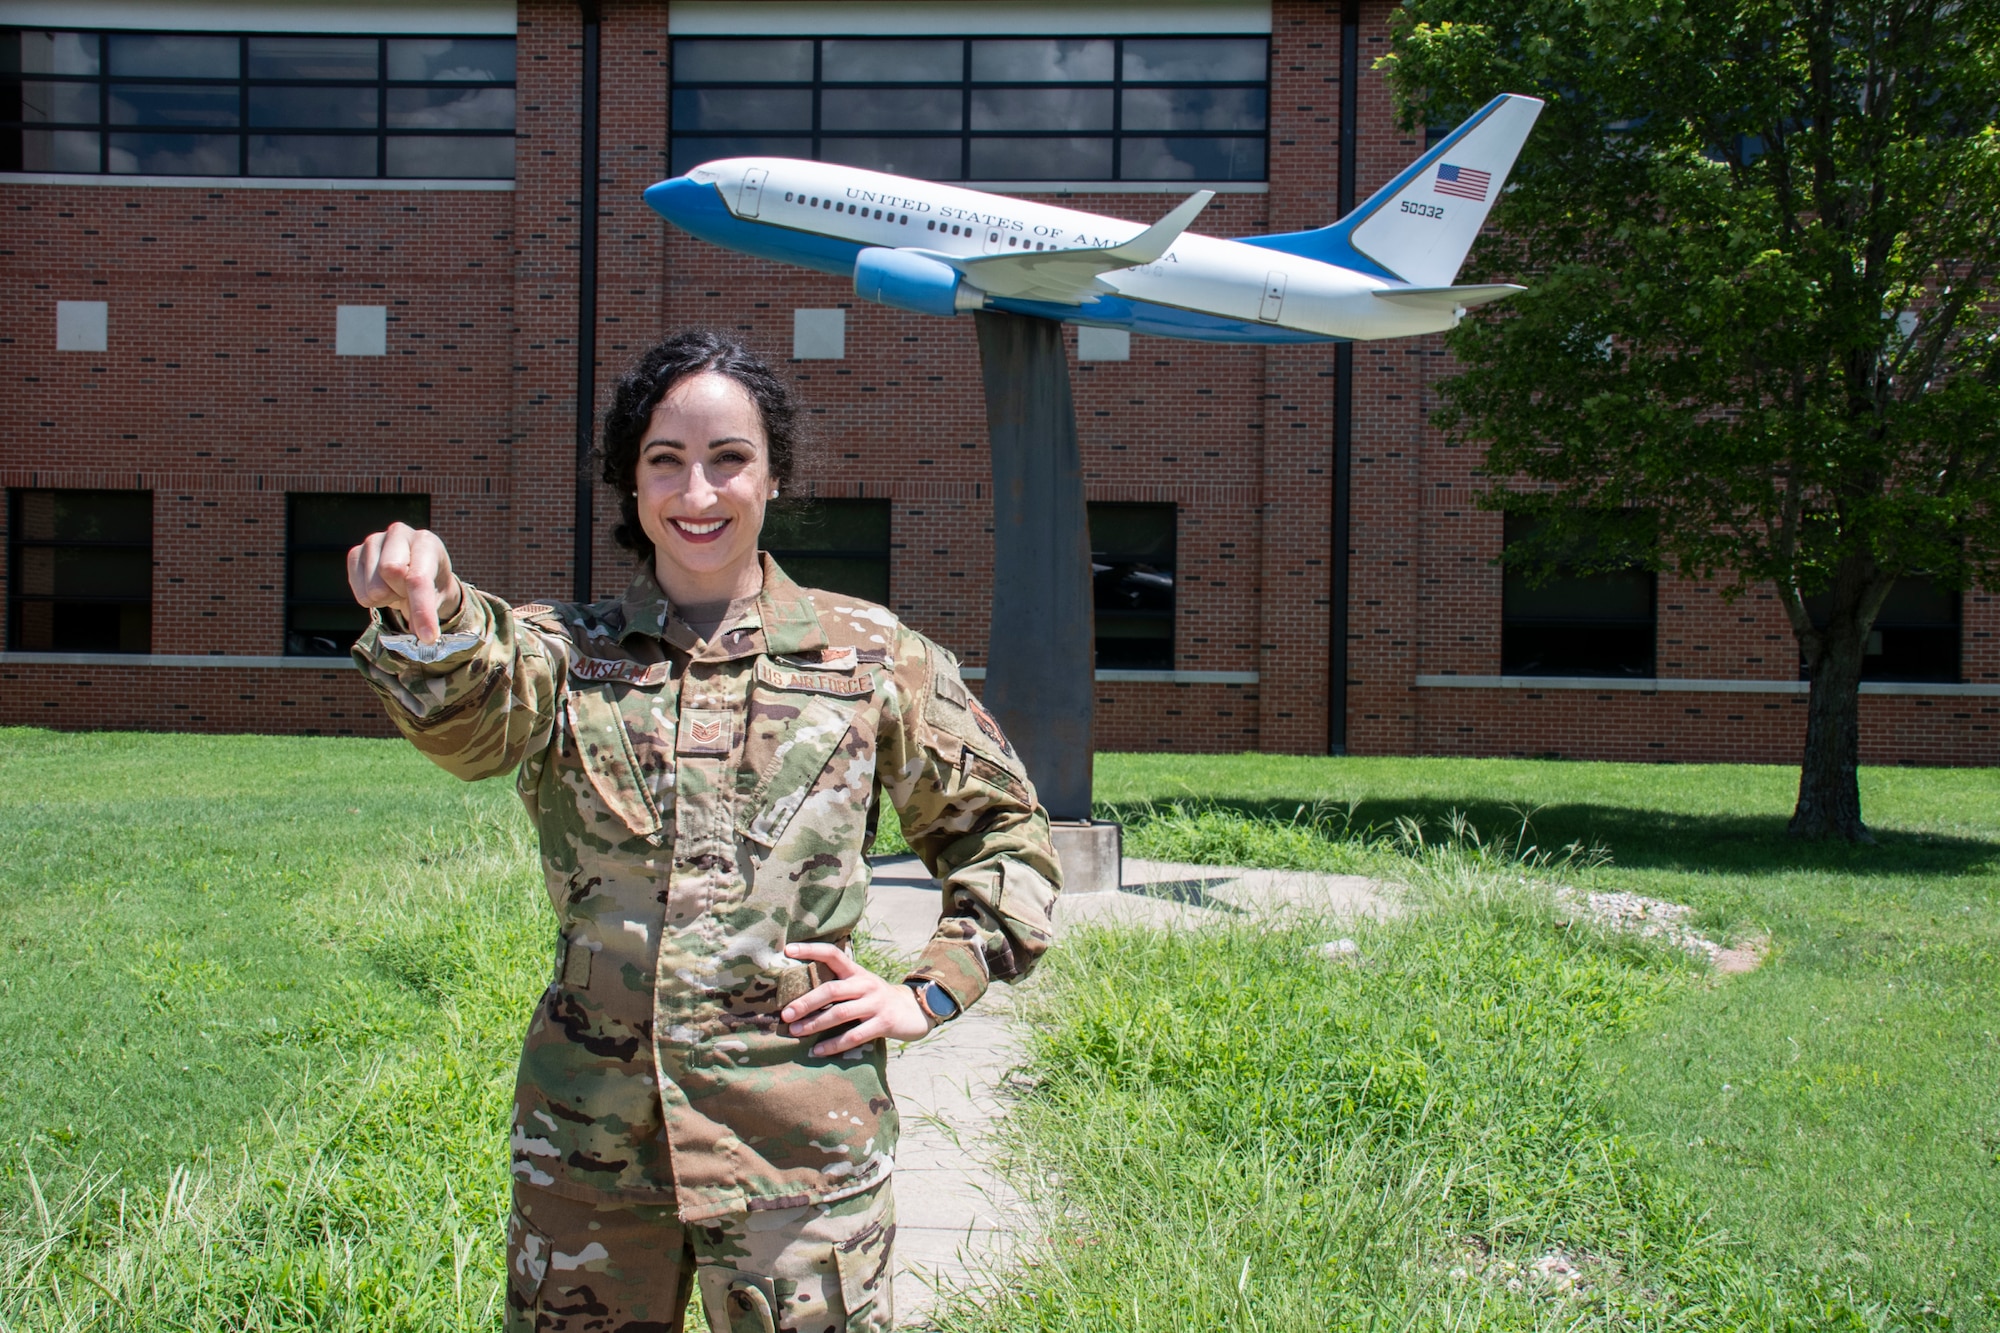 Tech. Sgt. Carola Anselmi, 73d Airlift Squadron flight attendant, poses for a photo at Scott Air Force Base, Ill., August 7, 2022. (U.S. Air Force photo by SSgt. Brooke Spenner)